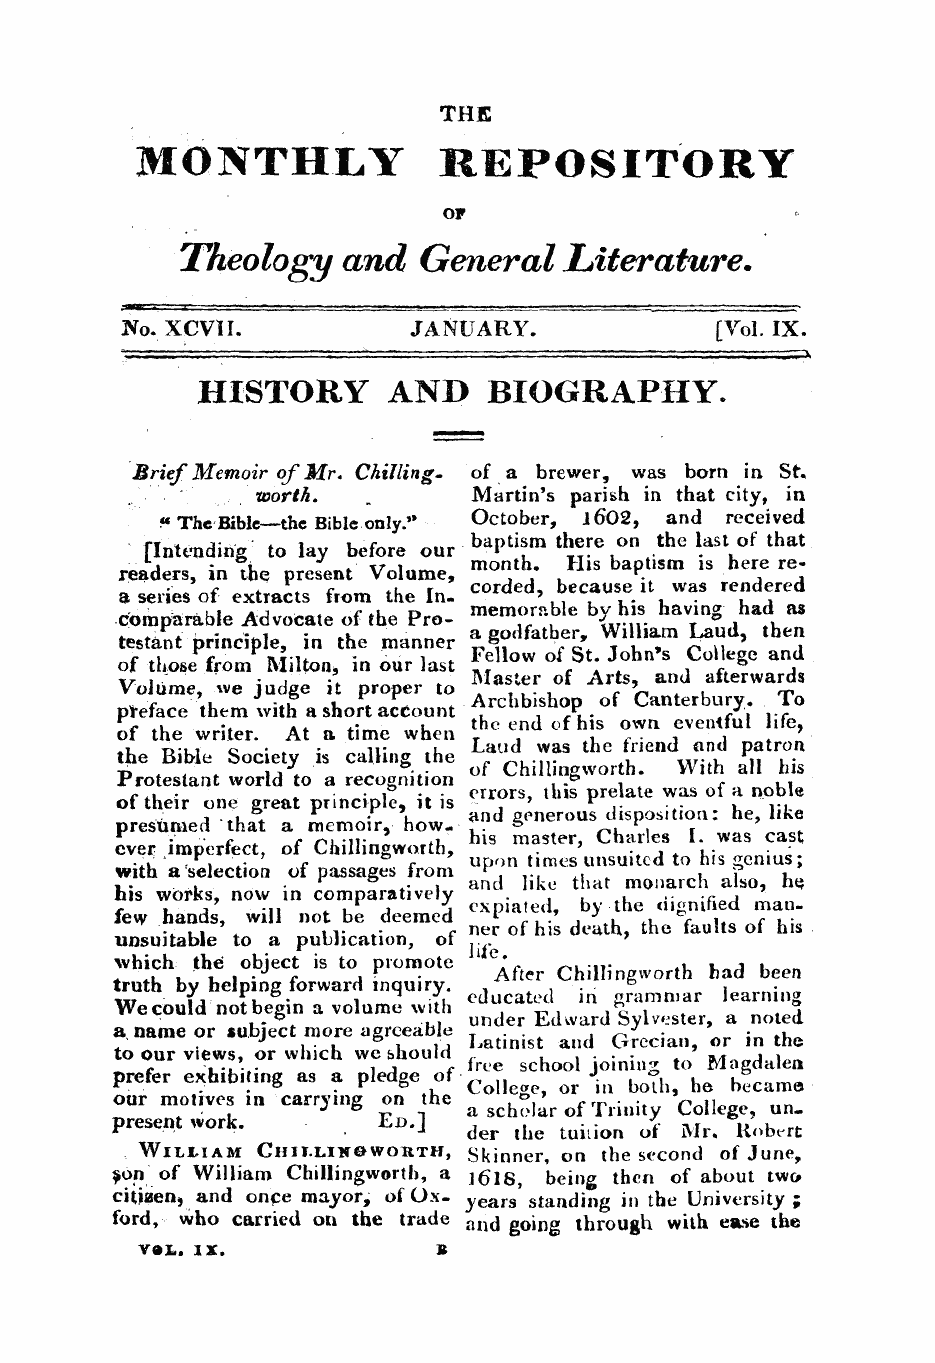 Monthly Repository (1806-1838) and Unitarian Chronicle (1832-1833): F Y, 1st edition - History And Biography.